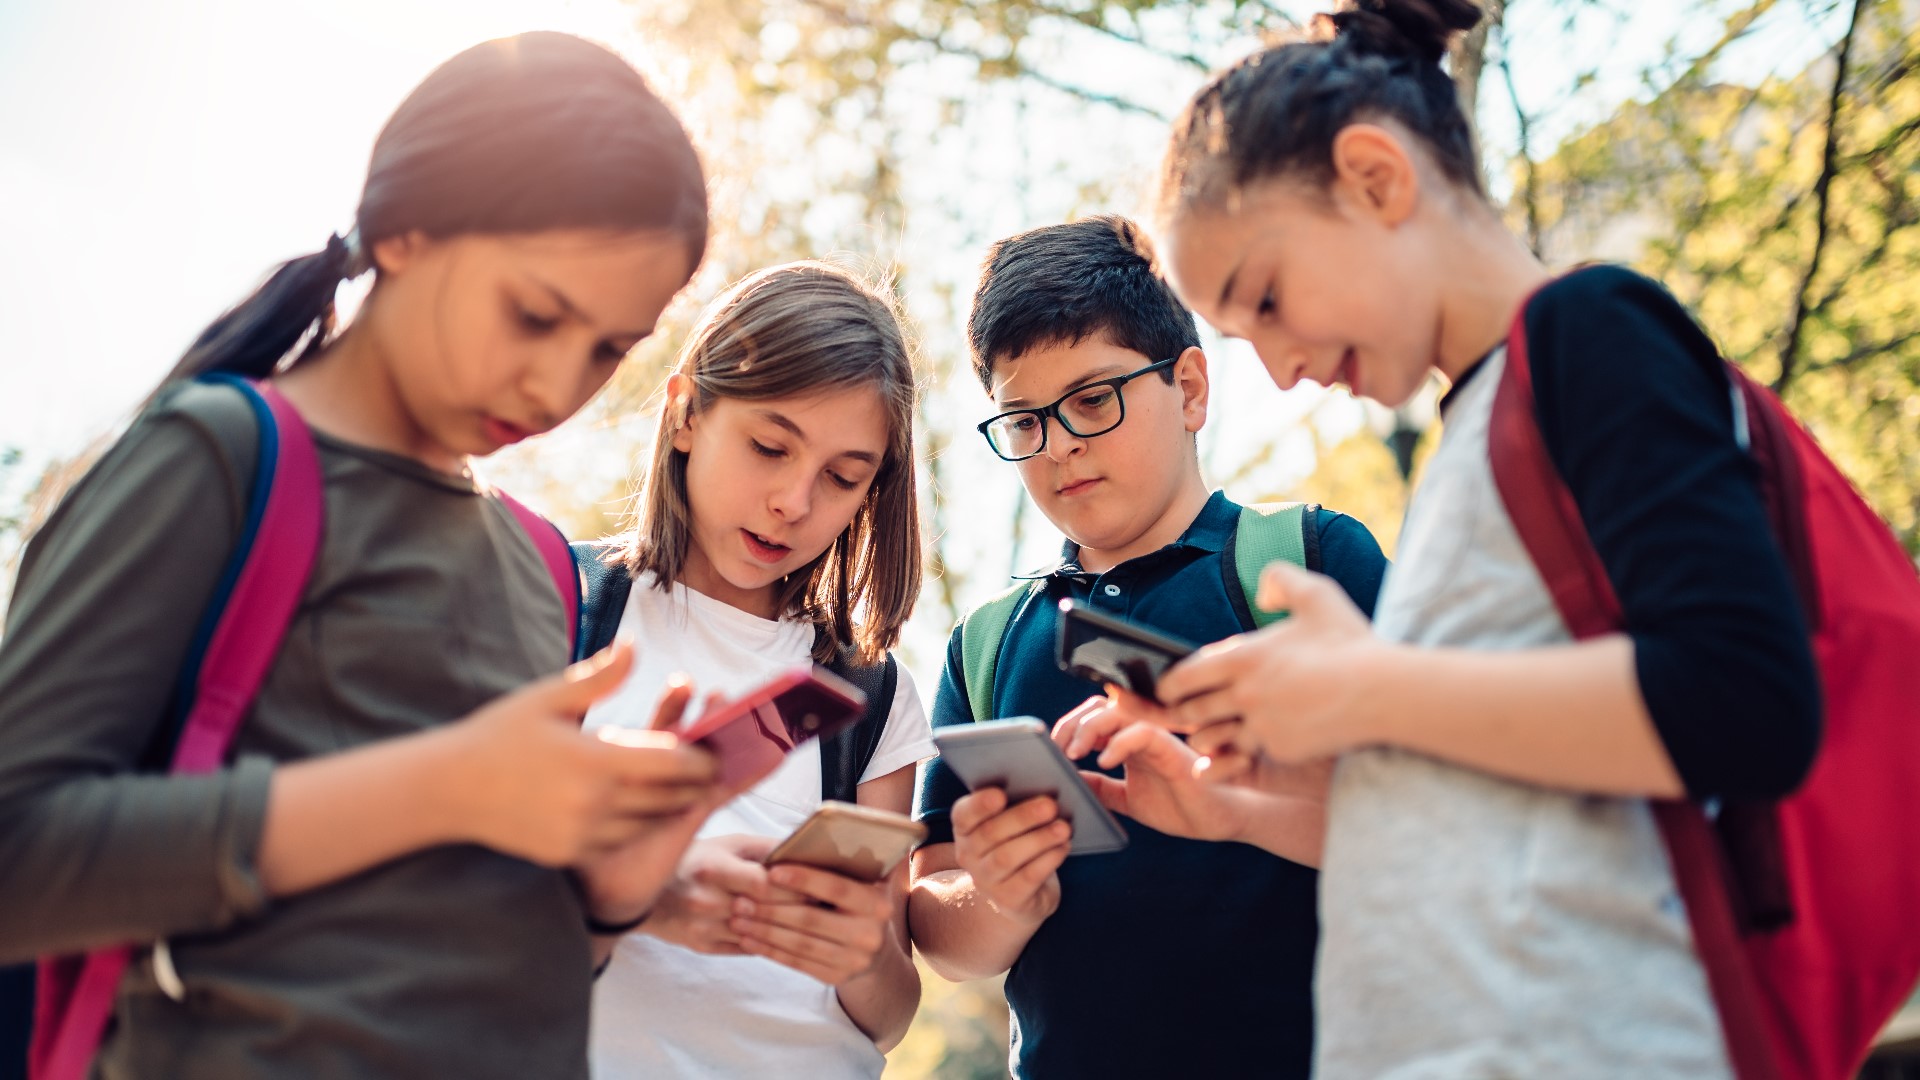 The amendment would require public schools to create a policy limiting phone use as much as possible during school hours.